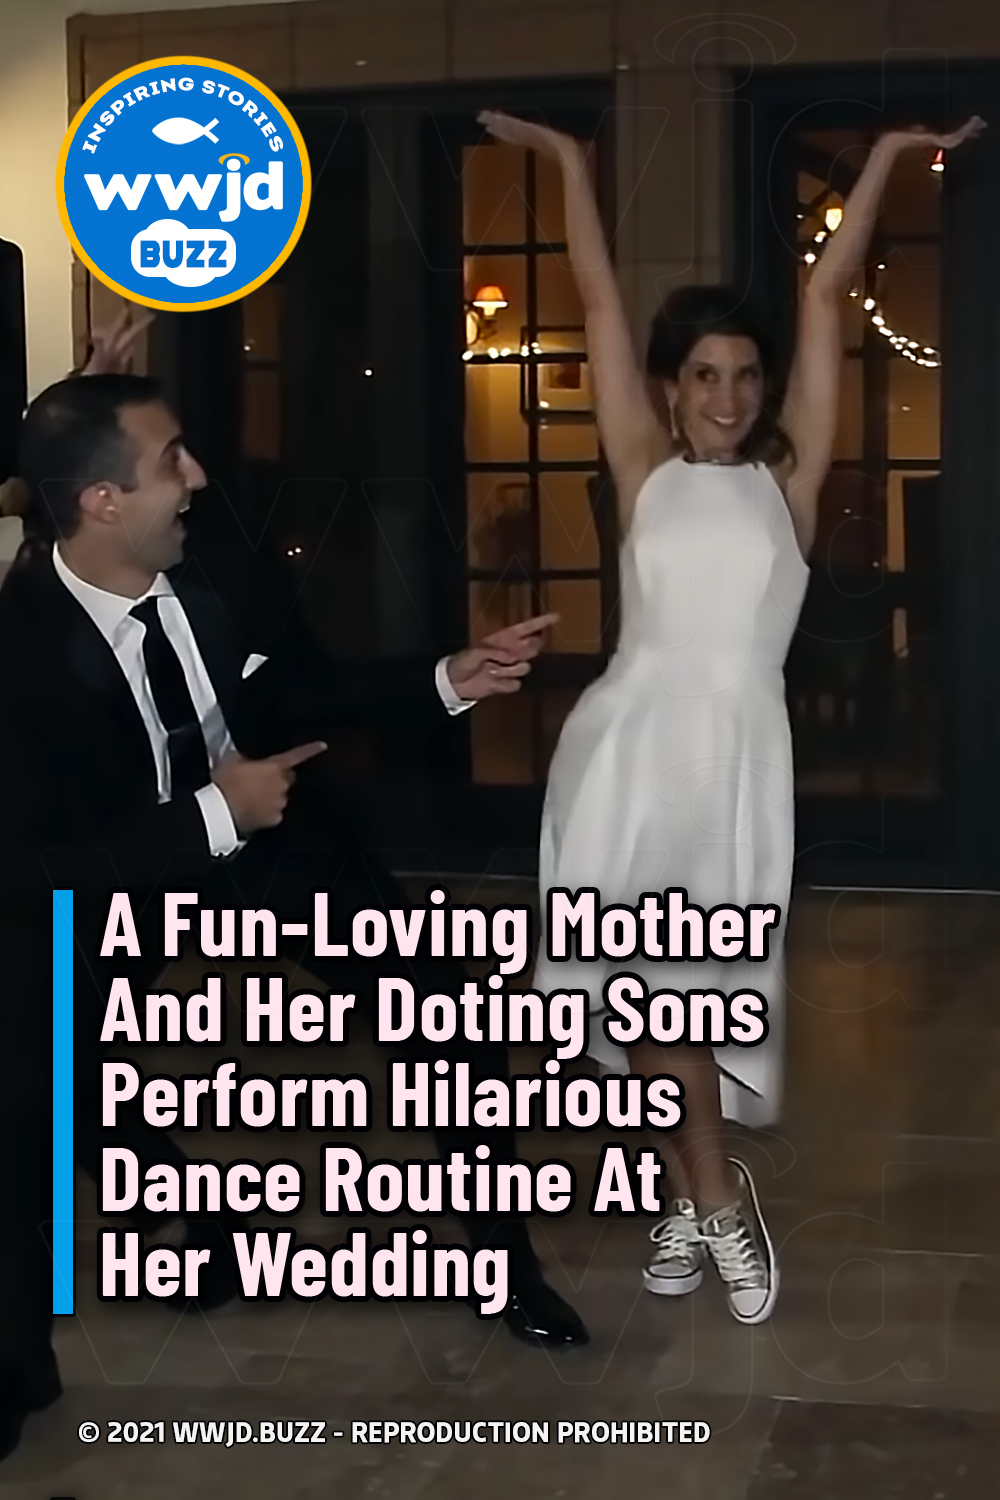 A Fun-Loving Mother And Her Doting Sons Perform Hilarious Dance Routine At Her Wedding